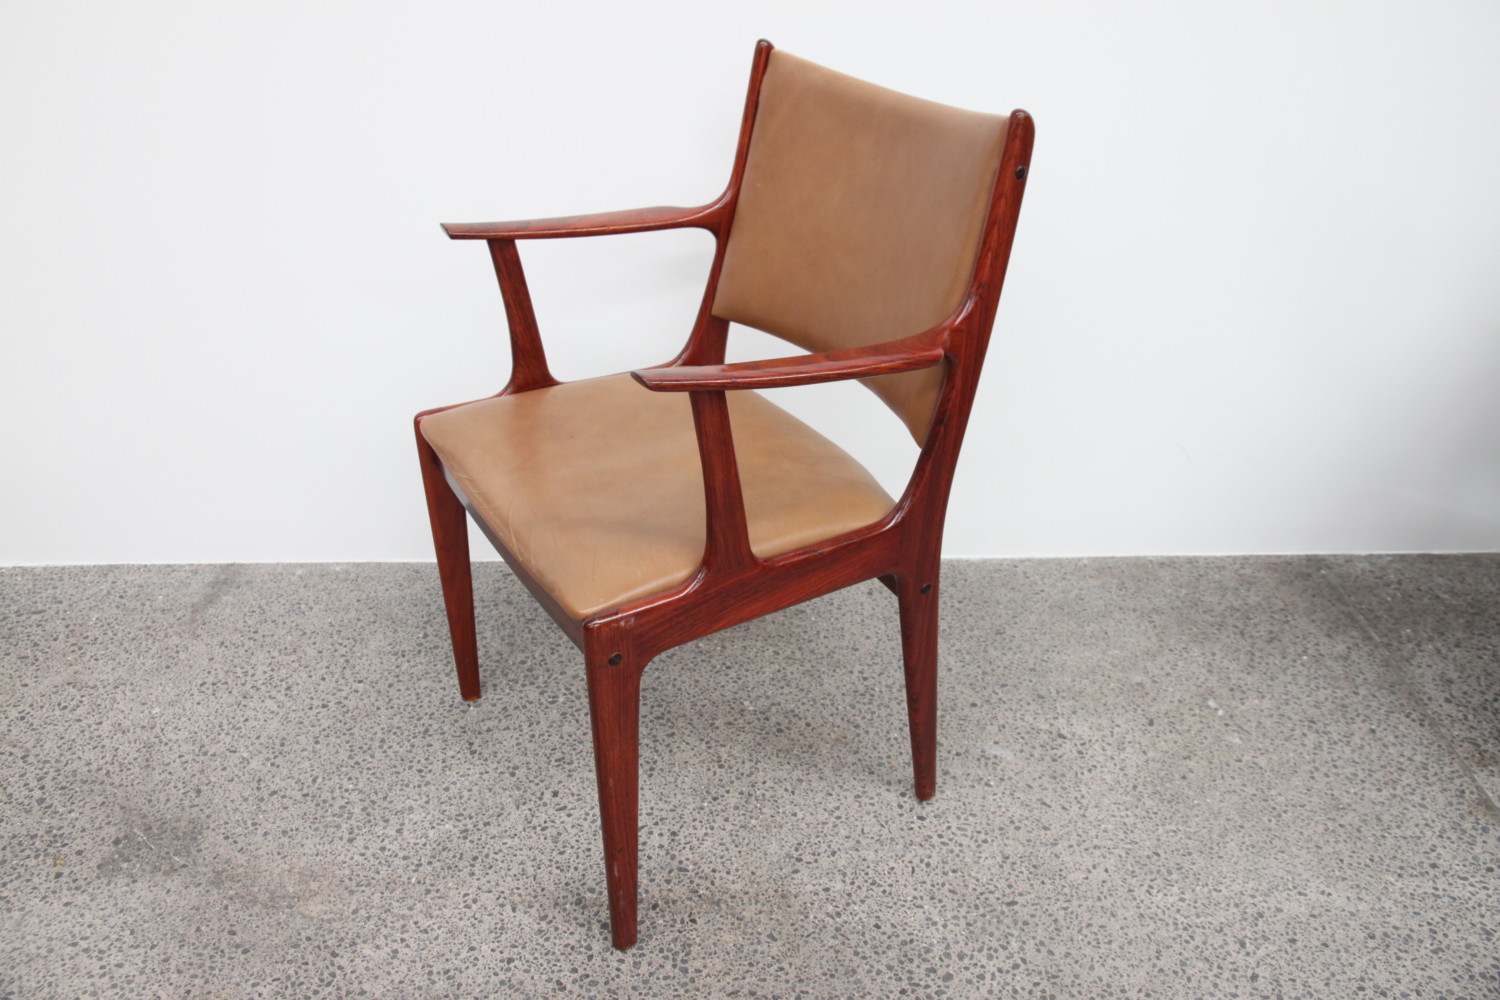 Dining Chairs by Johannes Andersen